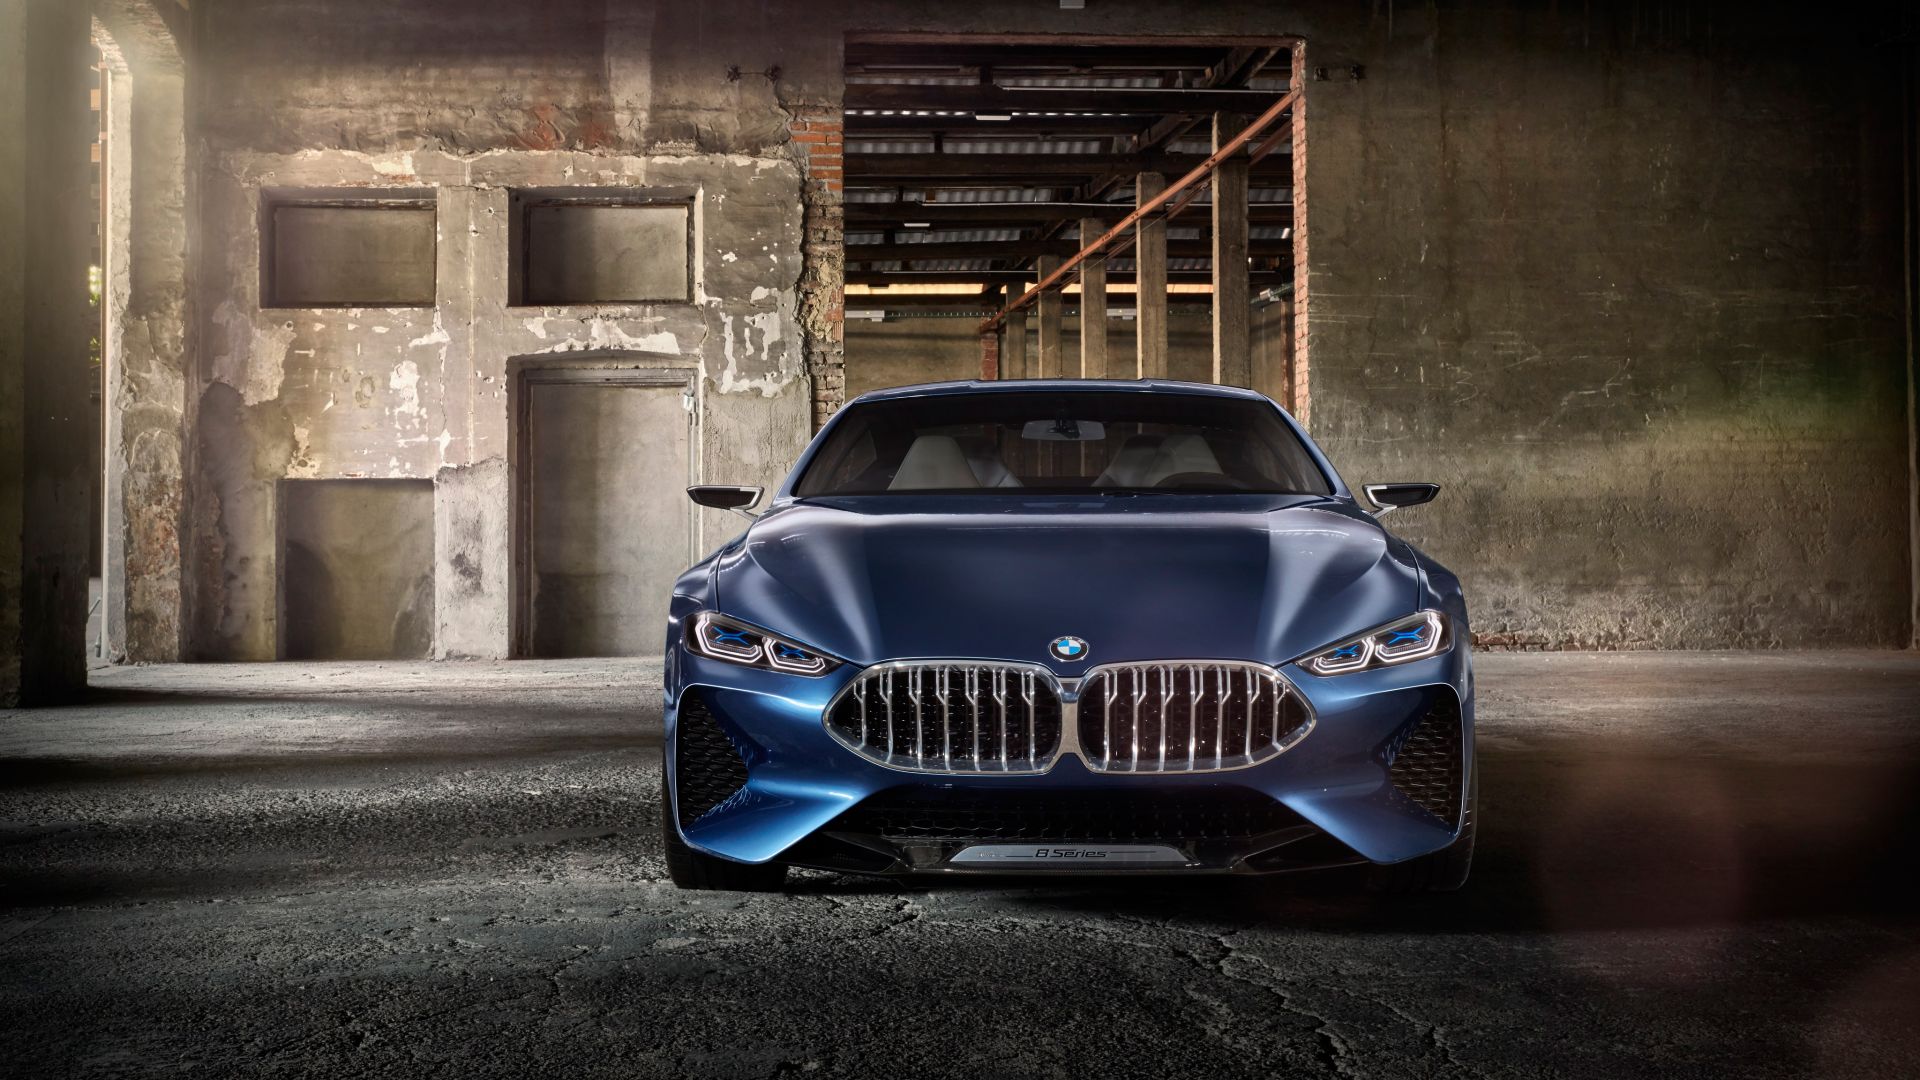 Wallpaper BMW Concept 8 Series, front view, luxury car, 4k